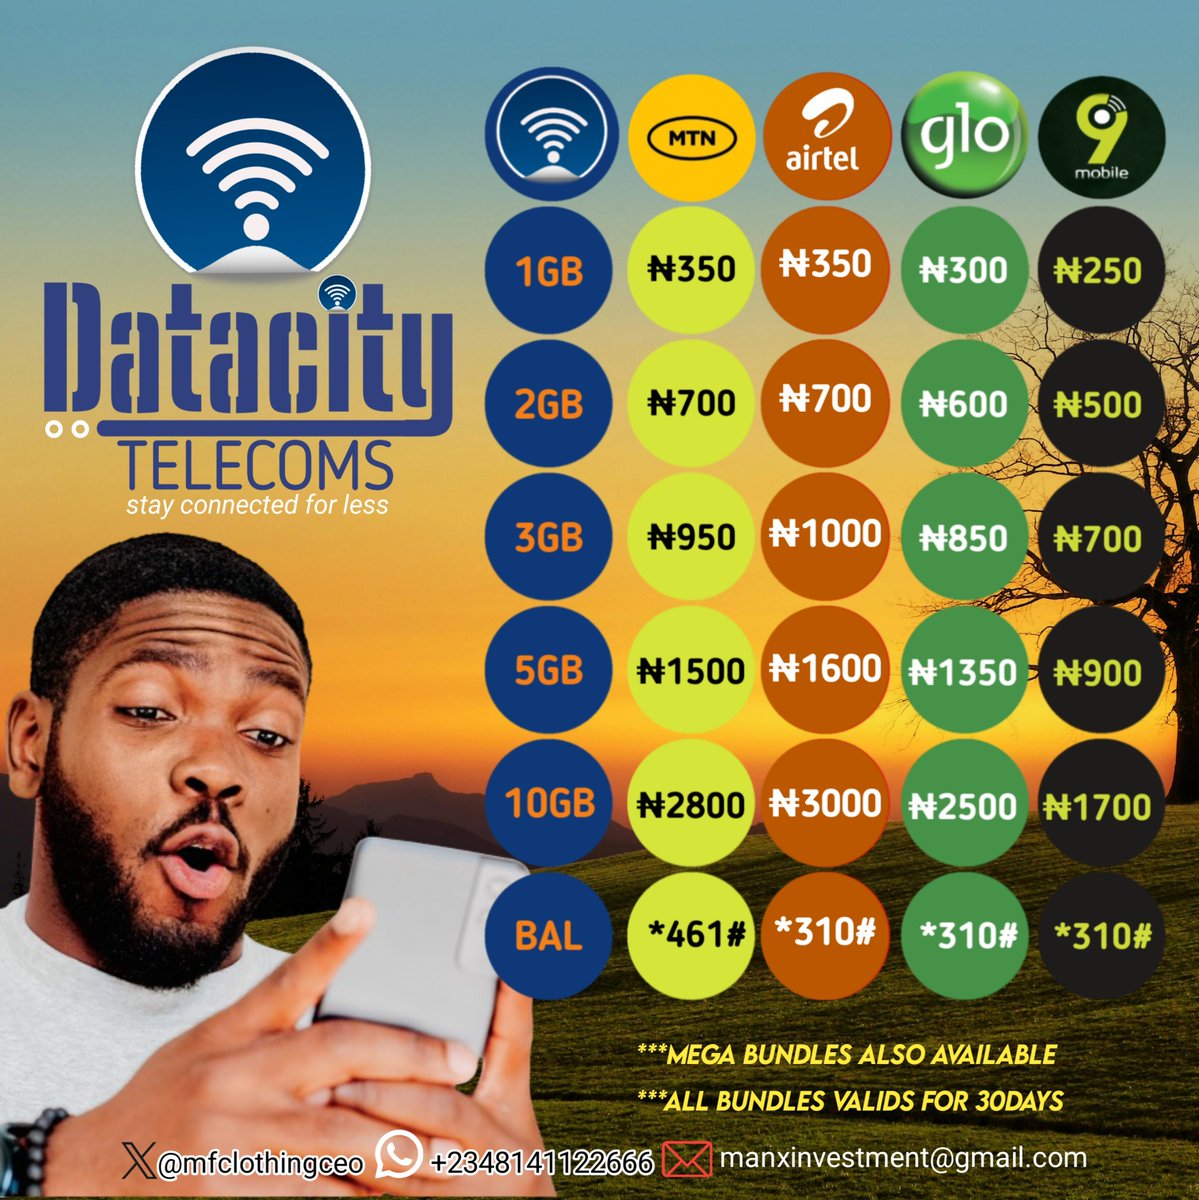 🔸Data for all network
🔸Airtime recharge
🔸Cable subscription
🔸Airtime to cash
🔸Giveaway plug
🔸Cash disbursement
🔸 Bet account funding

👤DataCity Telecoms
📍Nationwide
☎️08141122666
📌Best price, excellent service
#VendorsPRO
Kindly RP 🙏🏾